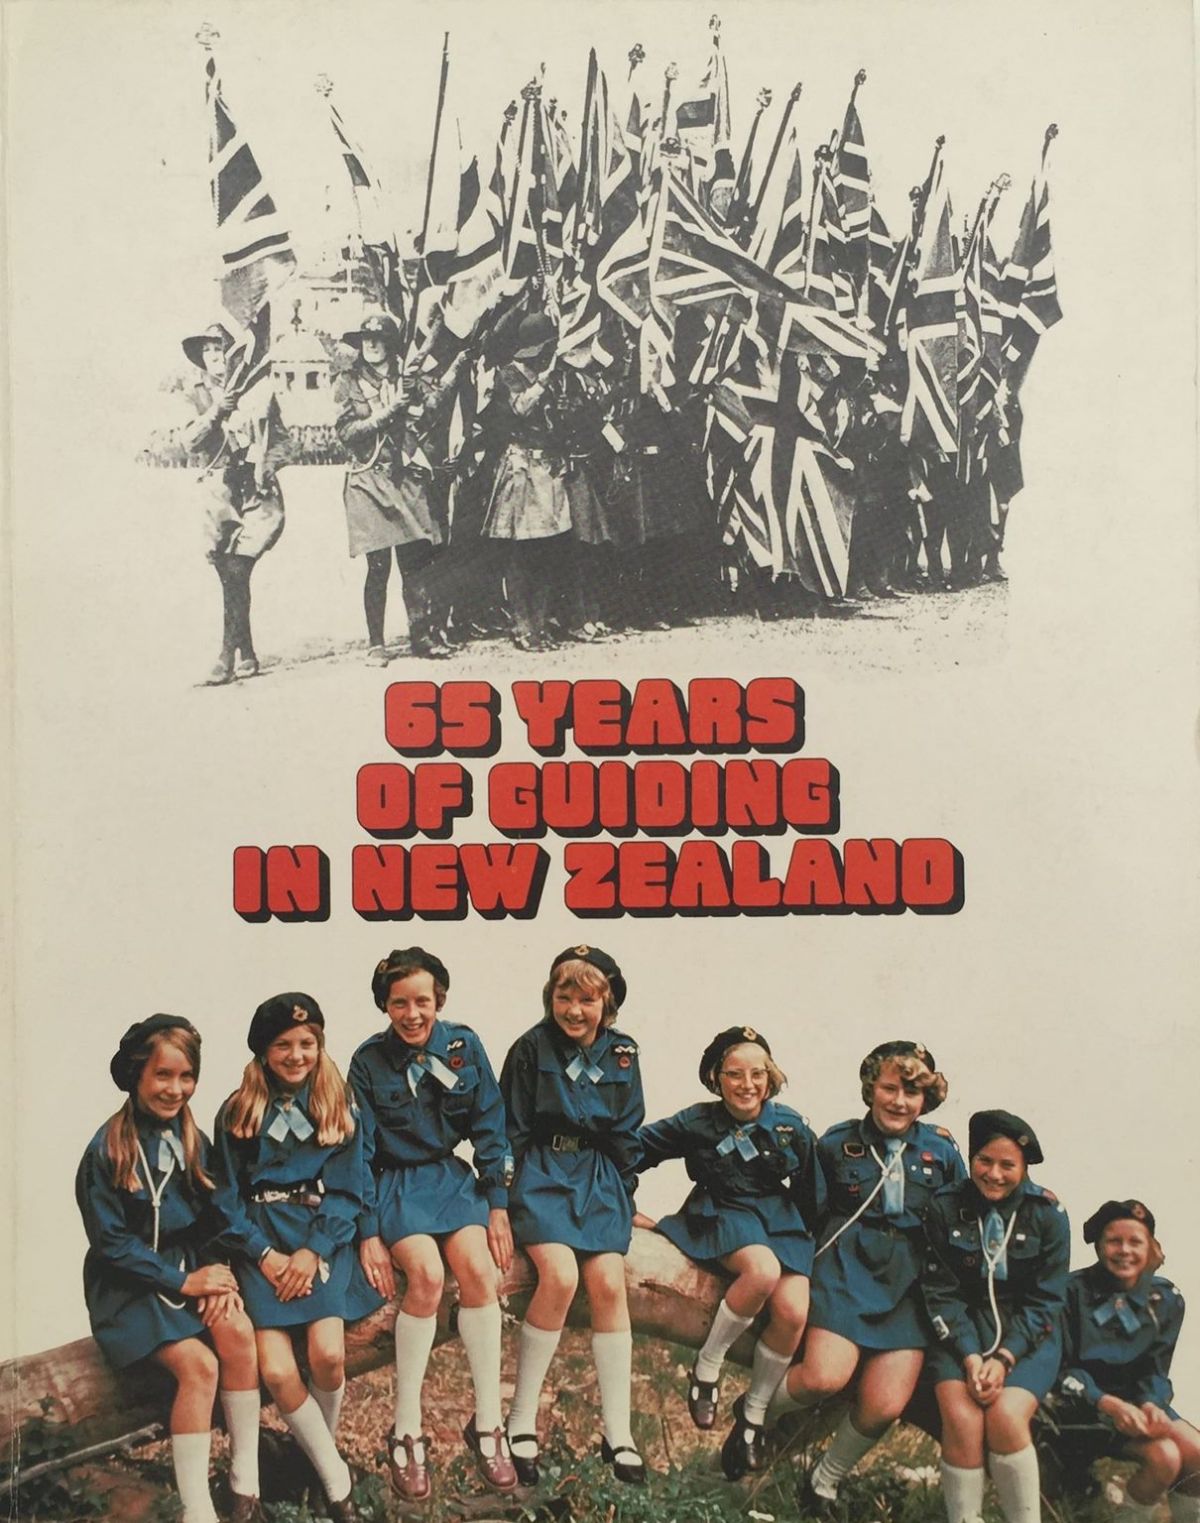 65 YEARS OF GUIDING In New Zealand 1908-1973